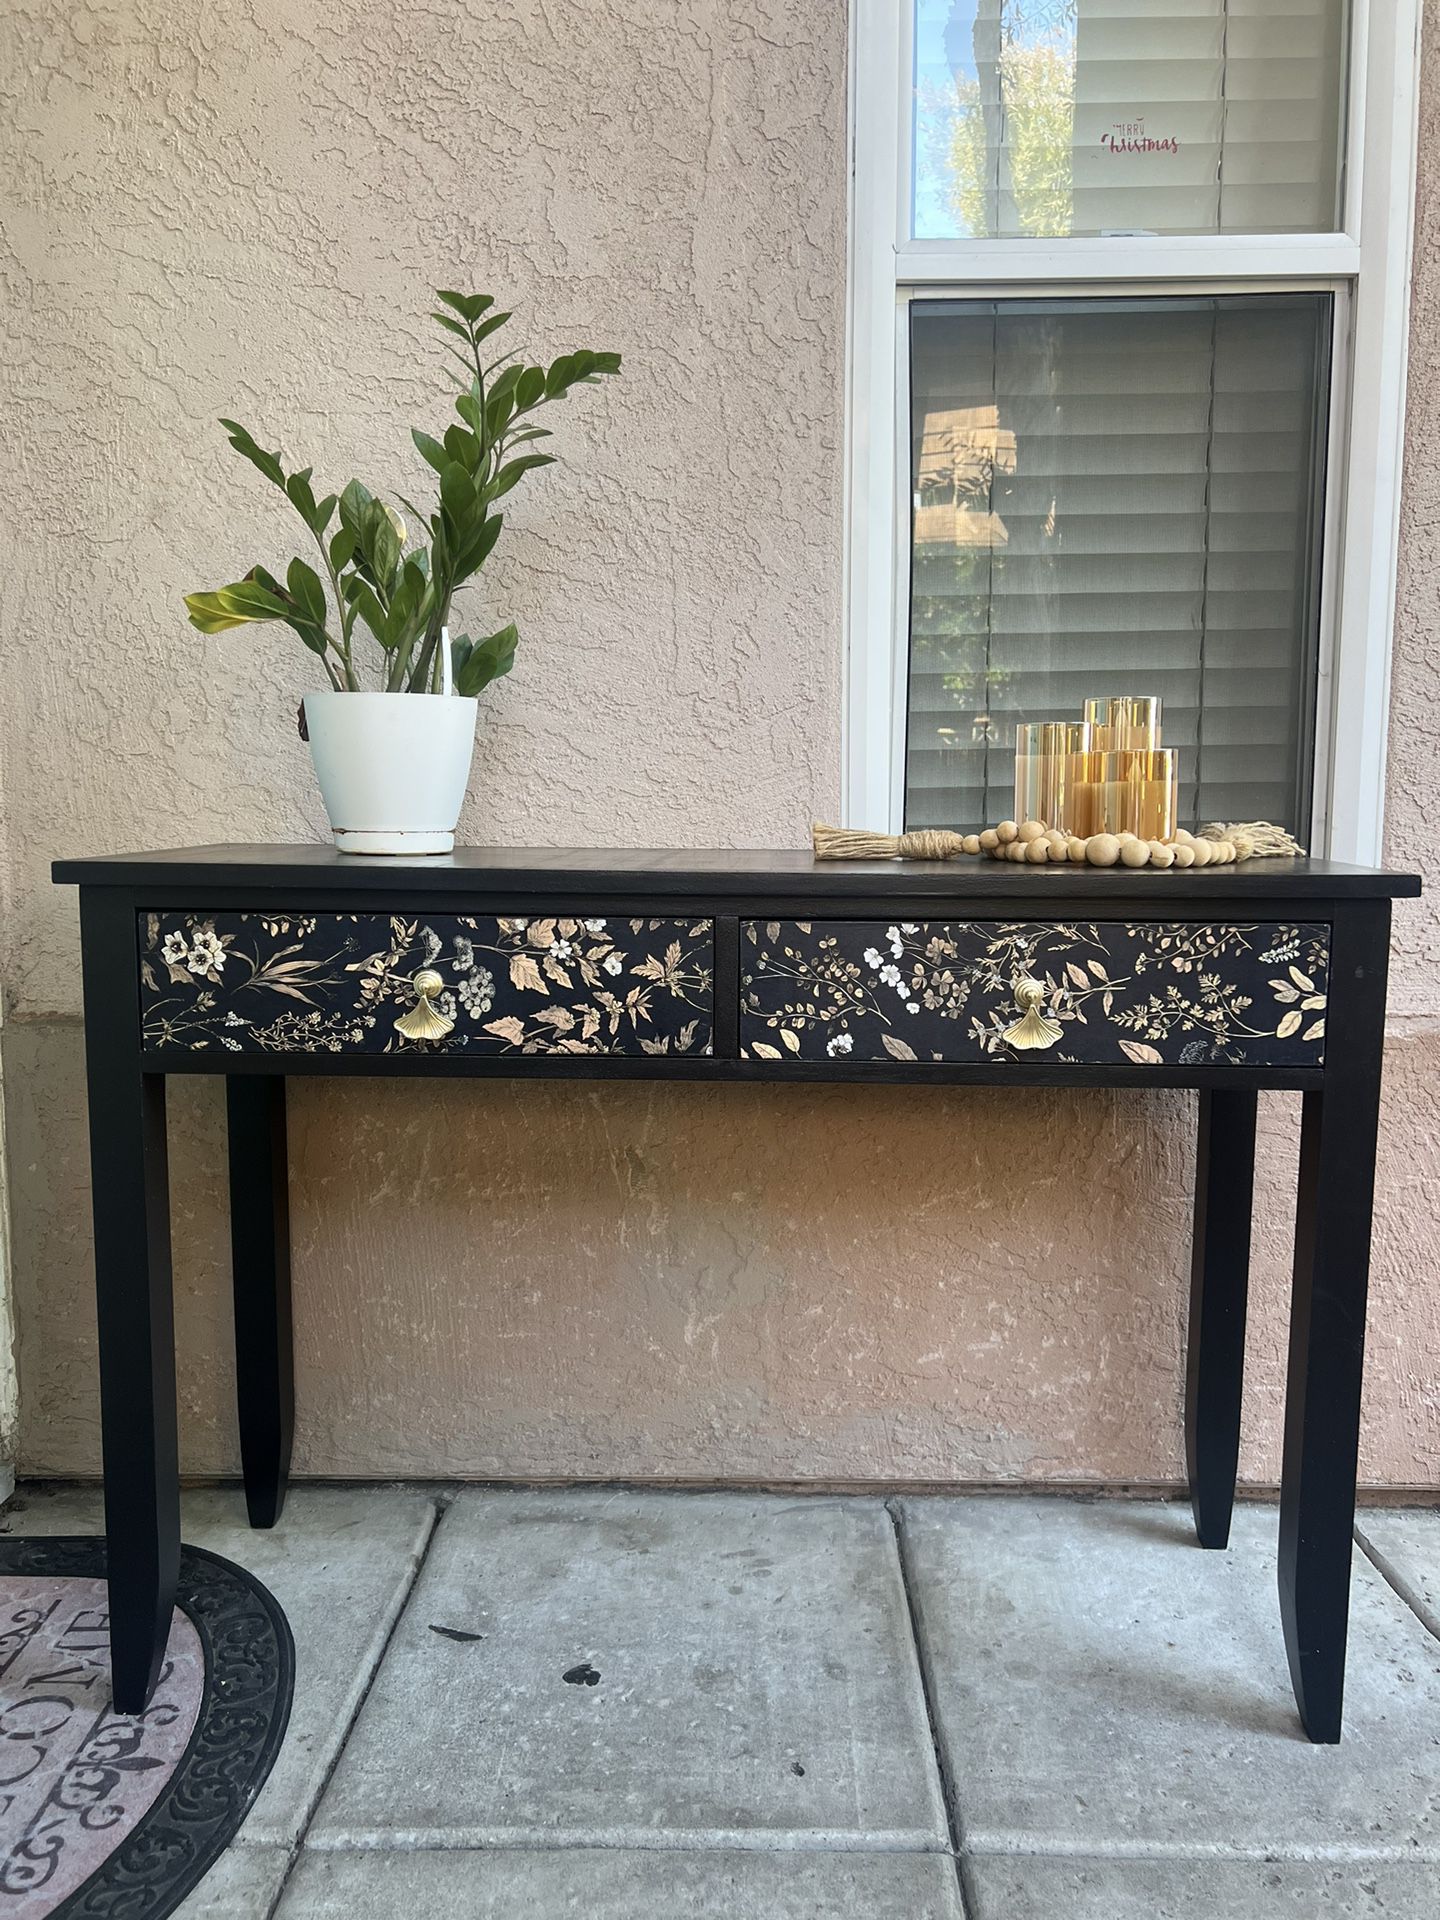 Refurbished black console table with Ginko leaf drawer knobs